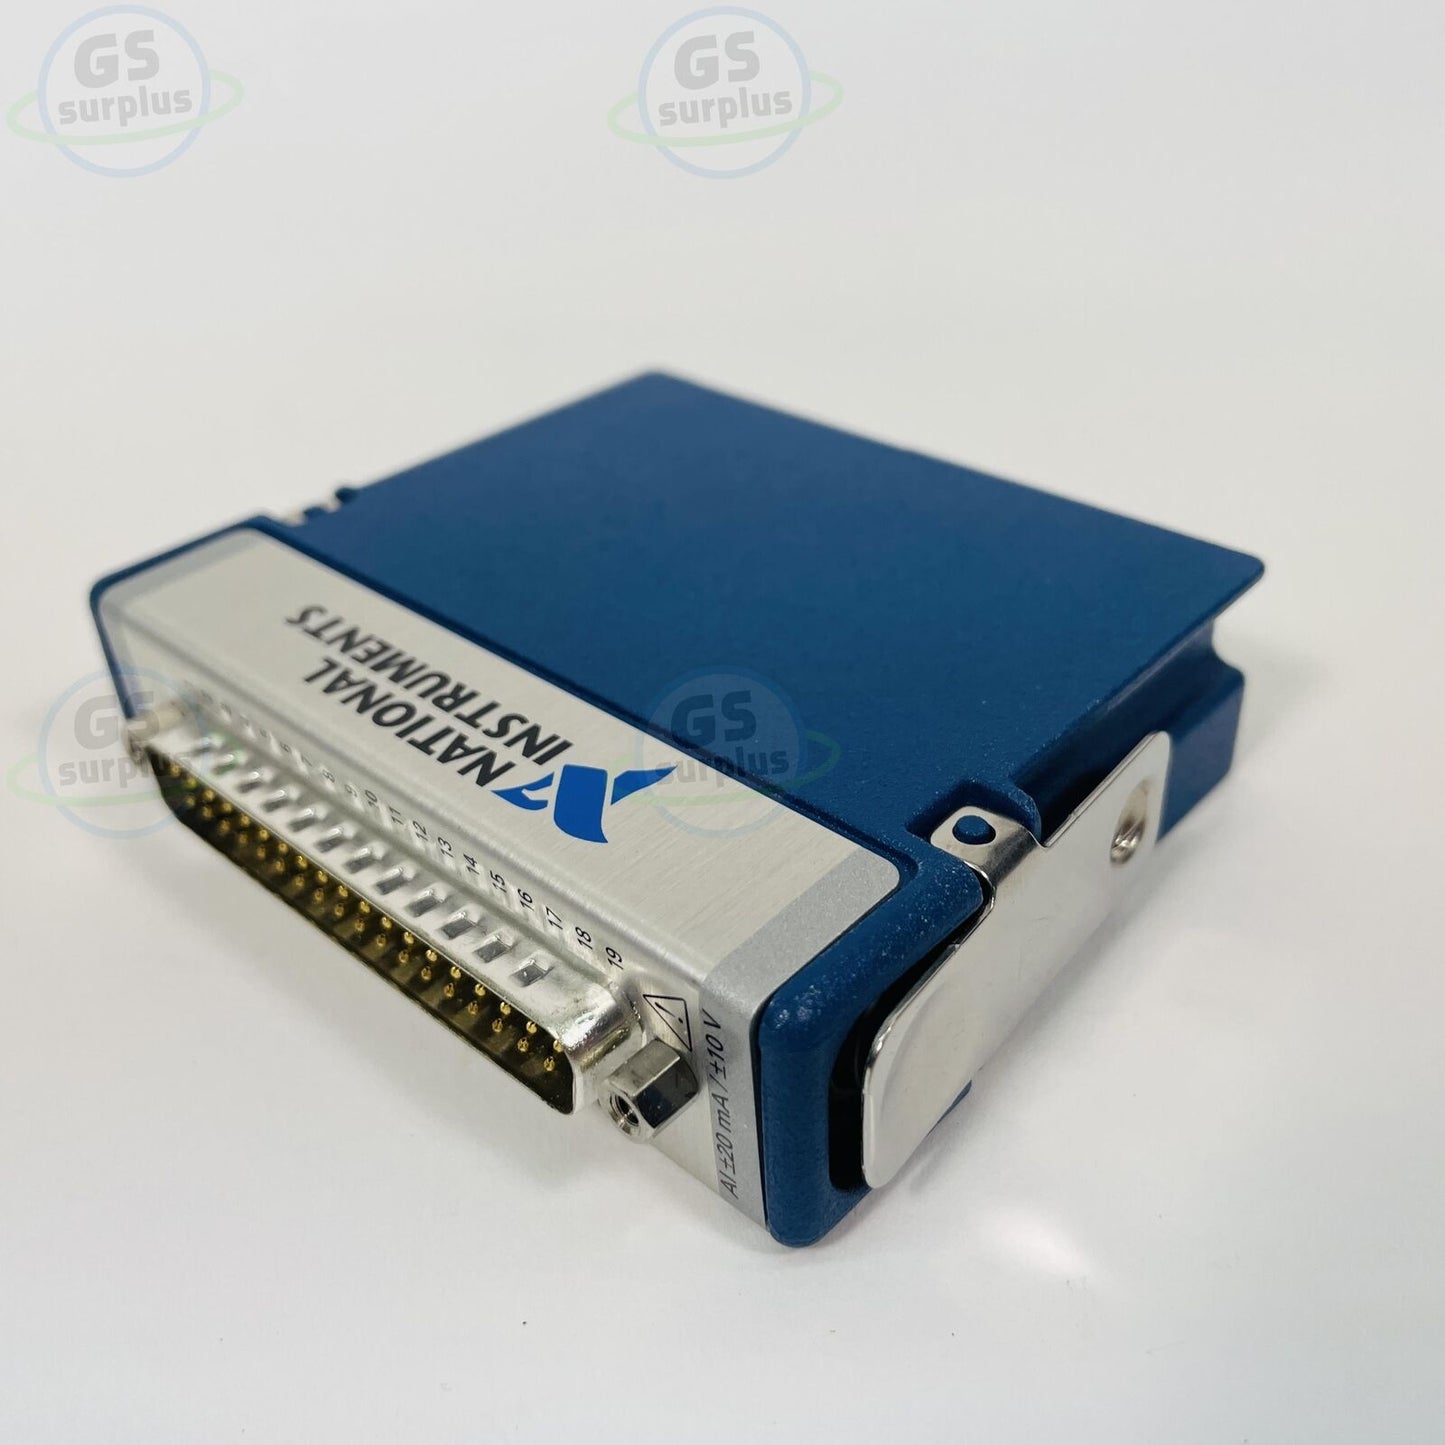 New NATIONAL INSTRUMENTS NI 9207 With DSUB, 16 Ch Voltage/Current Input 781068-0